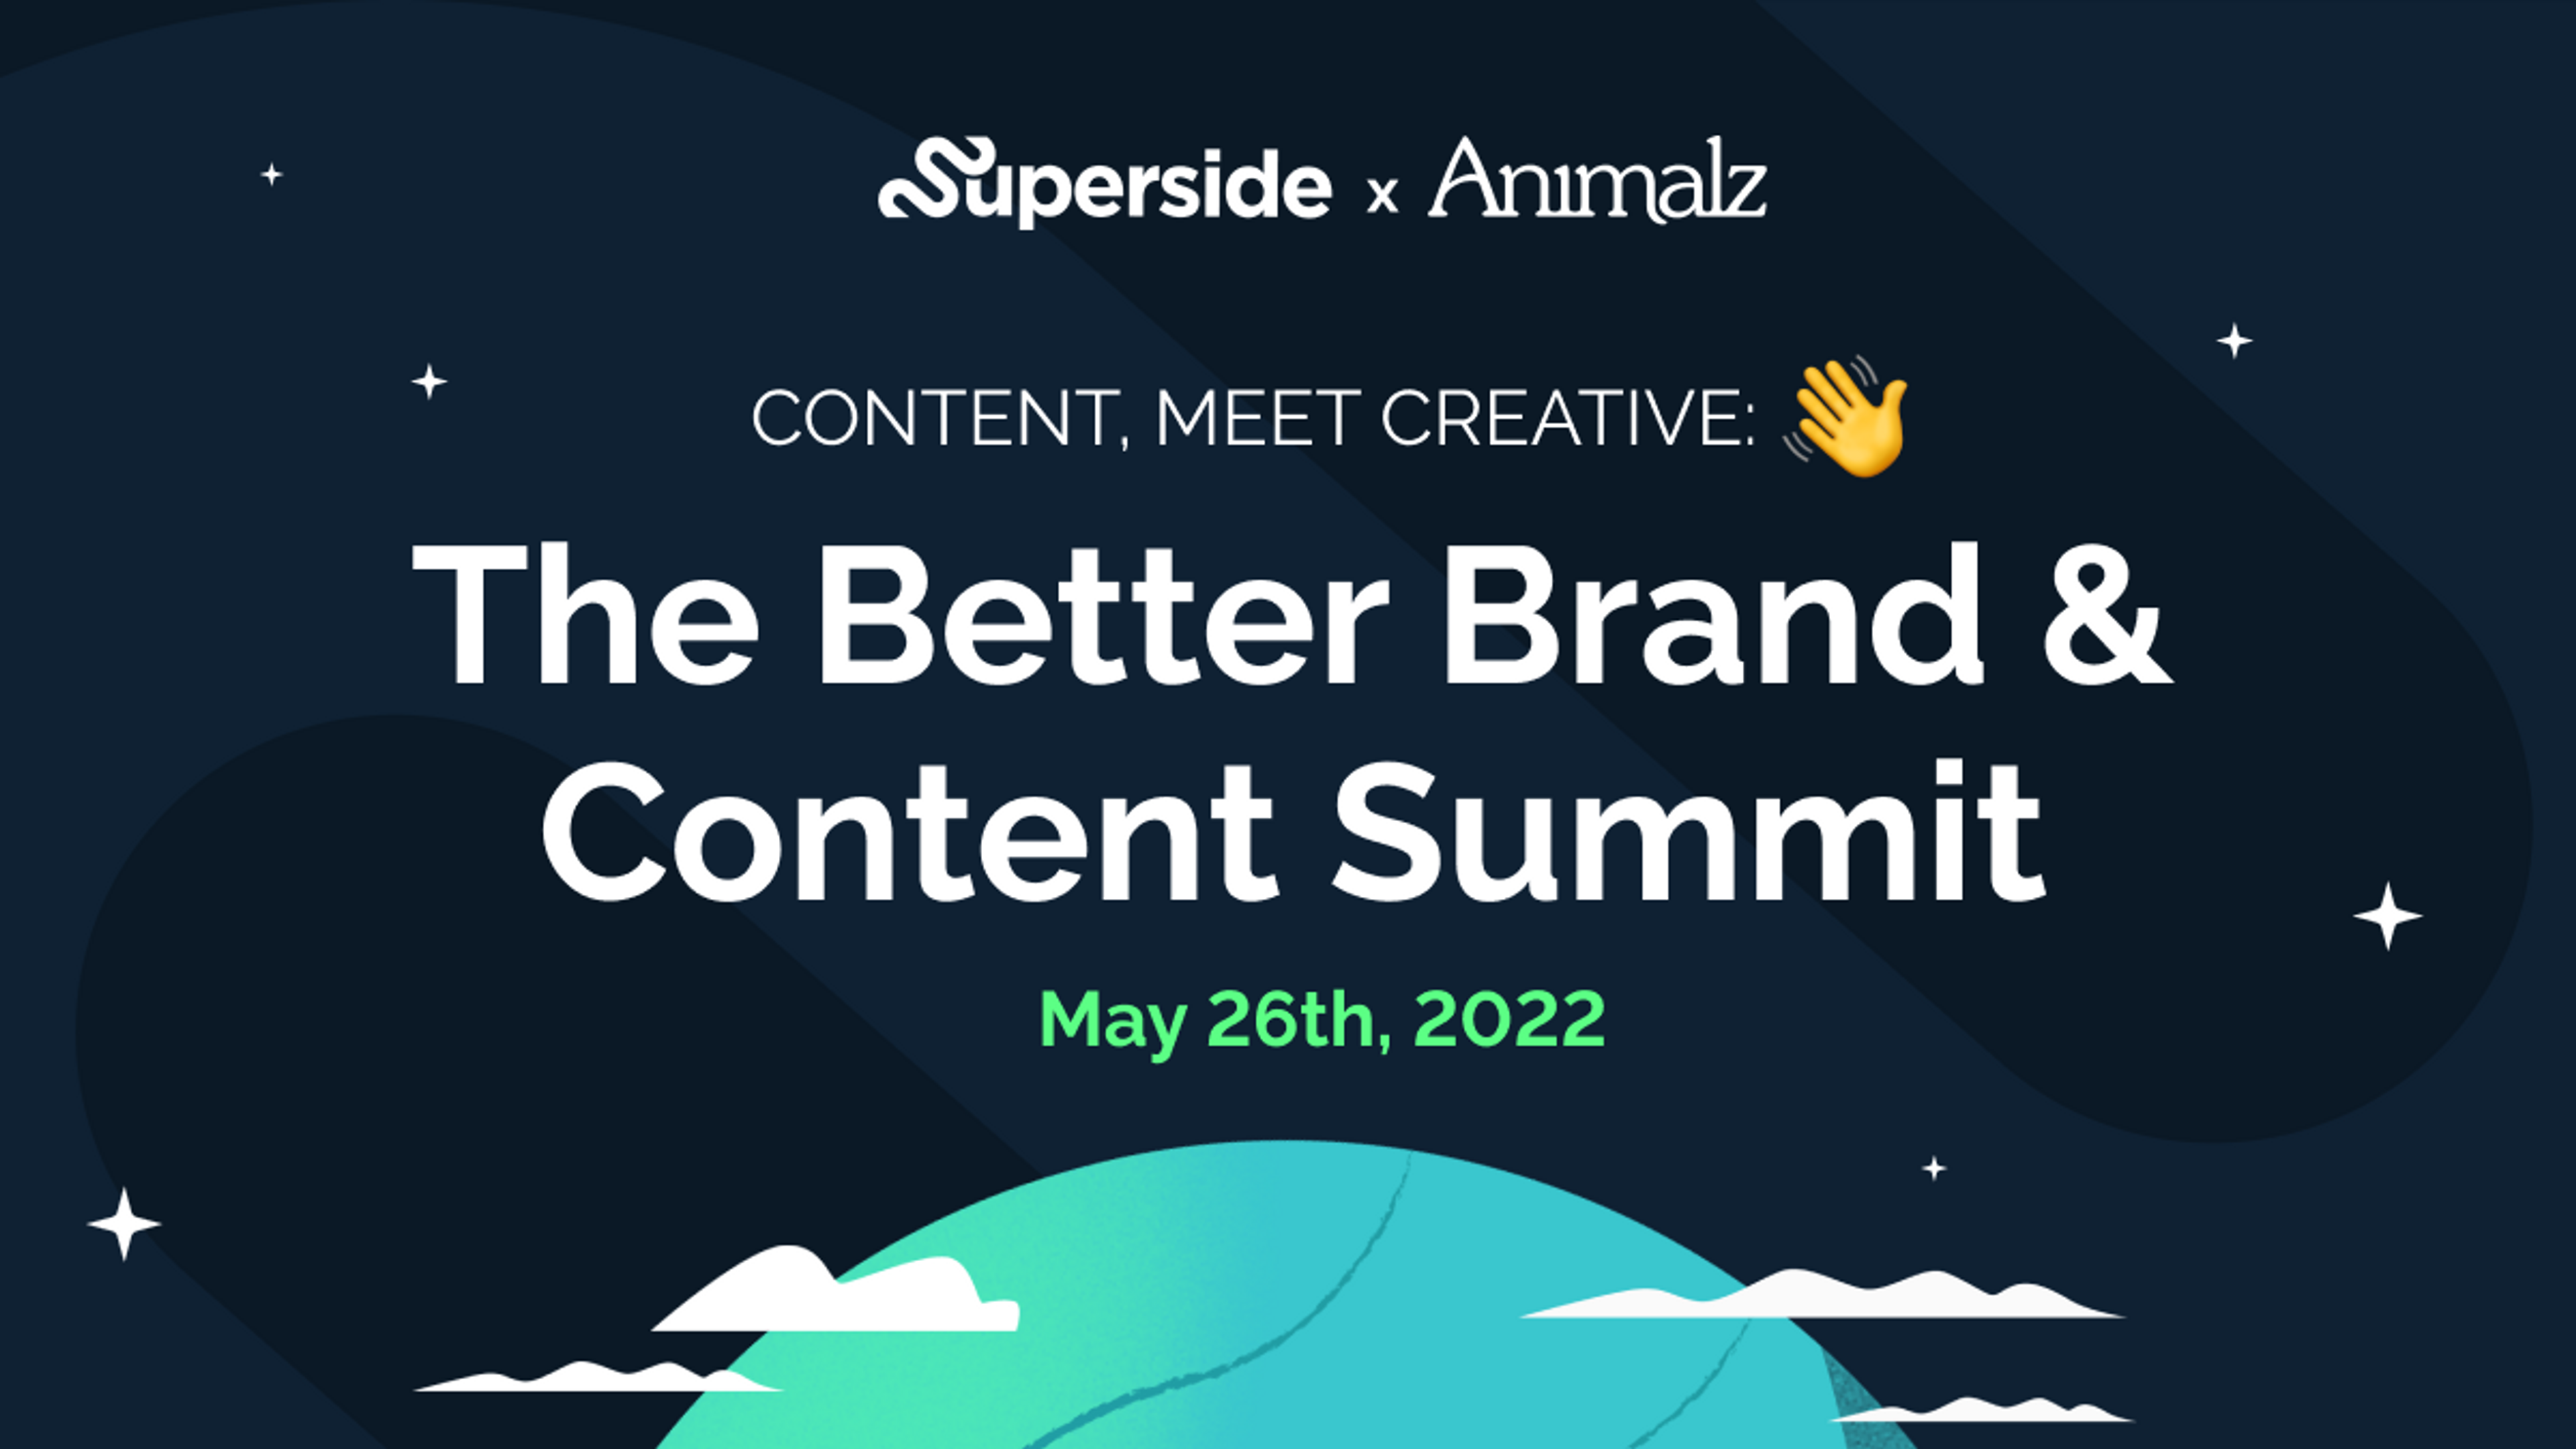 The Better Brand & Content Summit